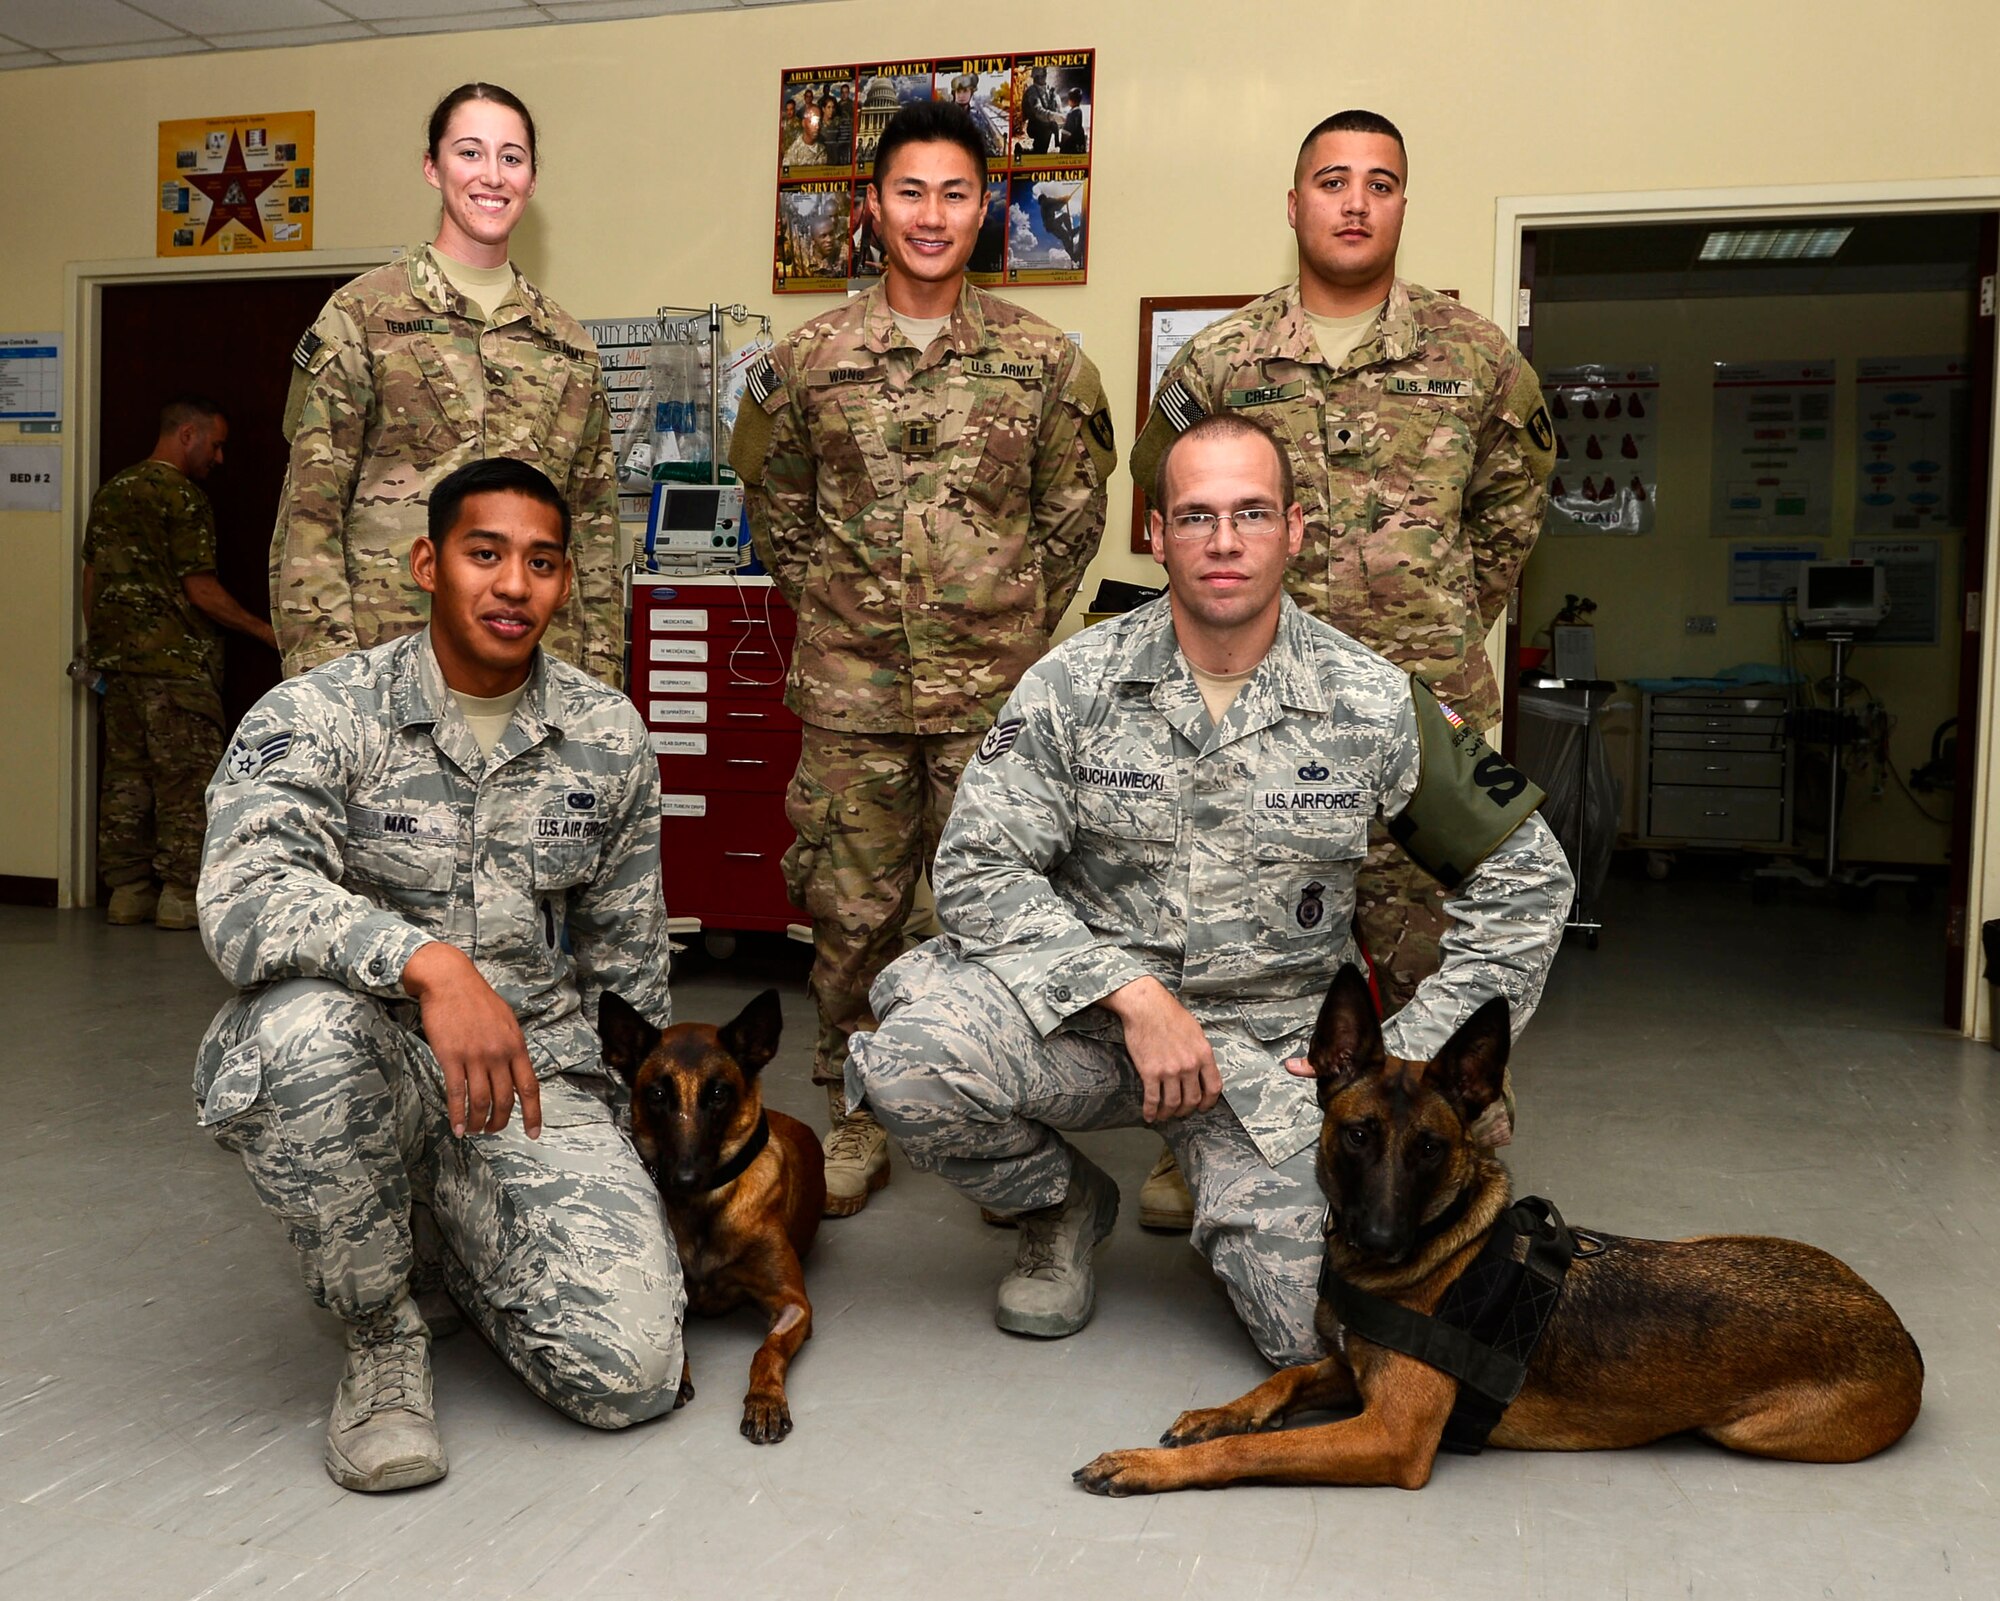 Members from the 463rd Military Detachment Veterinary Service and the 386 Expeditionary Security Forces Squadron visit hospitals in the area of responsibility to conduct MWD medical emergency training at an undisclosed location in Southwest Asia, Sept. 12, 2015. The team traveled to conduct training to medical personnel throughout the area of responsibility, providing information on support and stabilizing MWDs until more advanced care is available. (U.S. Air Force photo by Senior Airman Racheal E. Watson/Released)